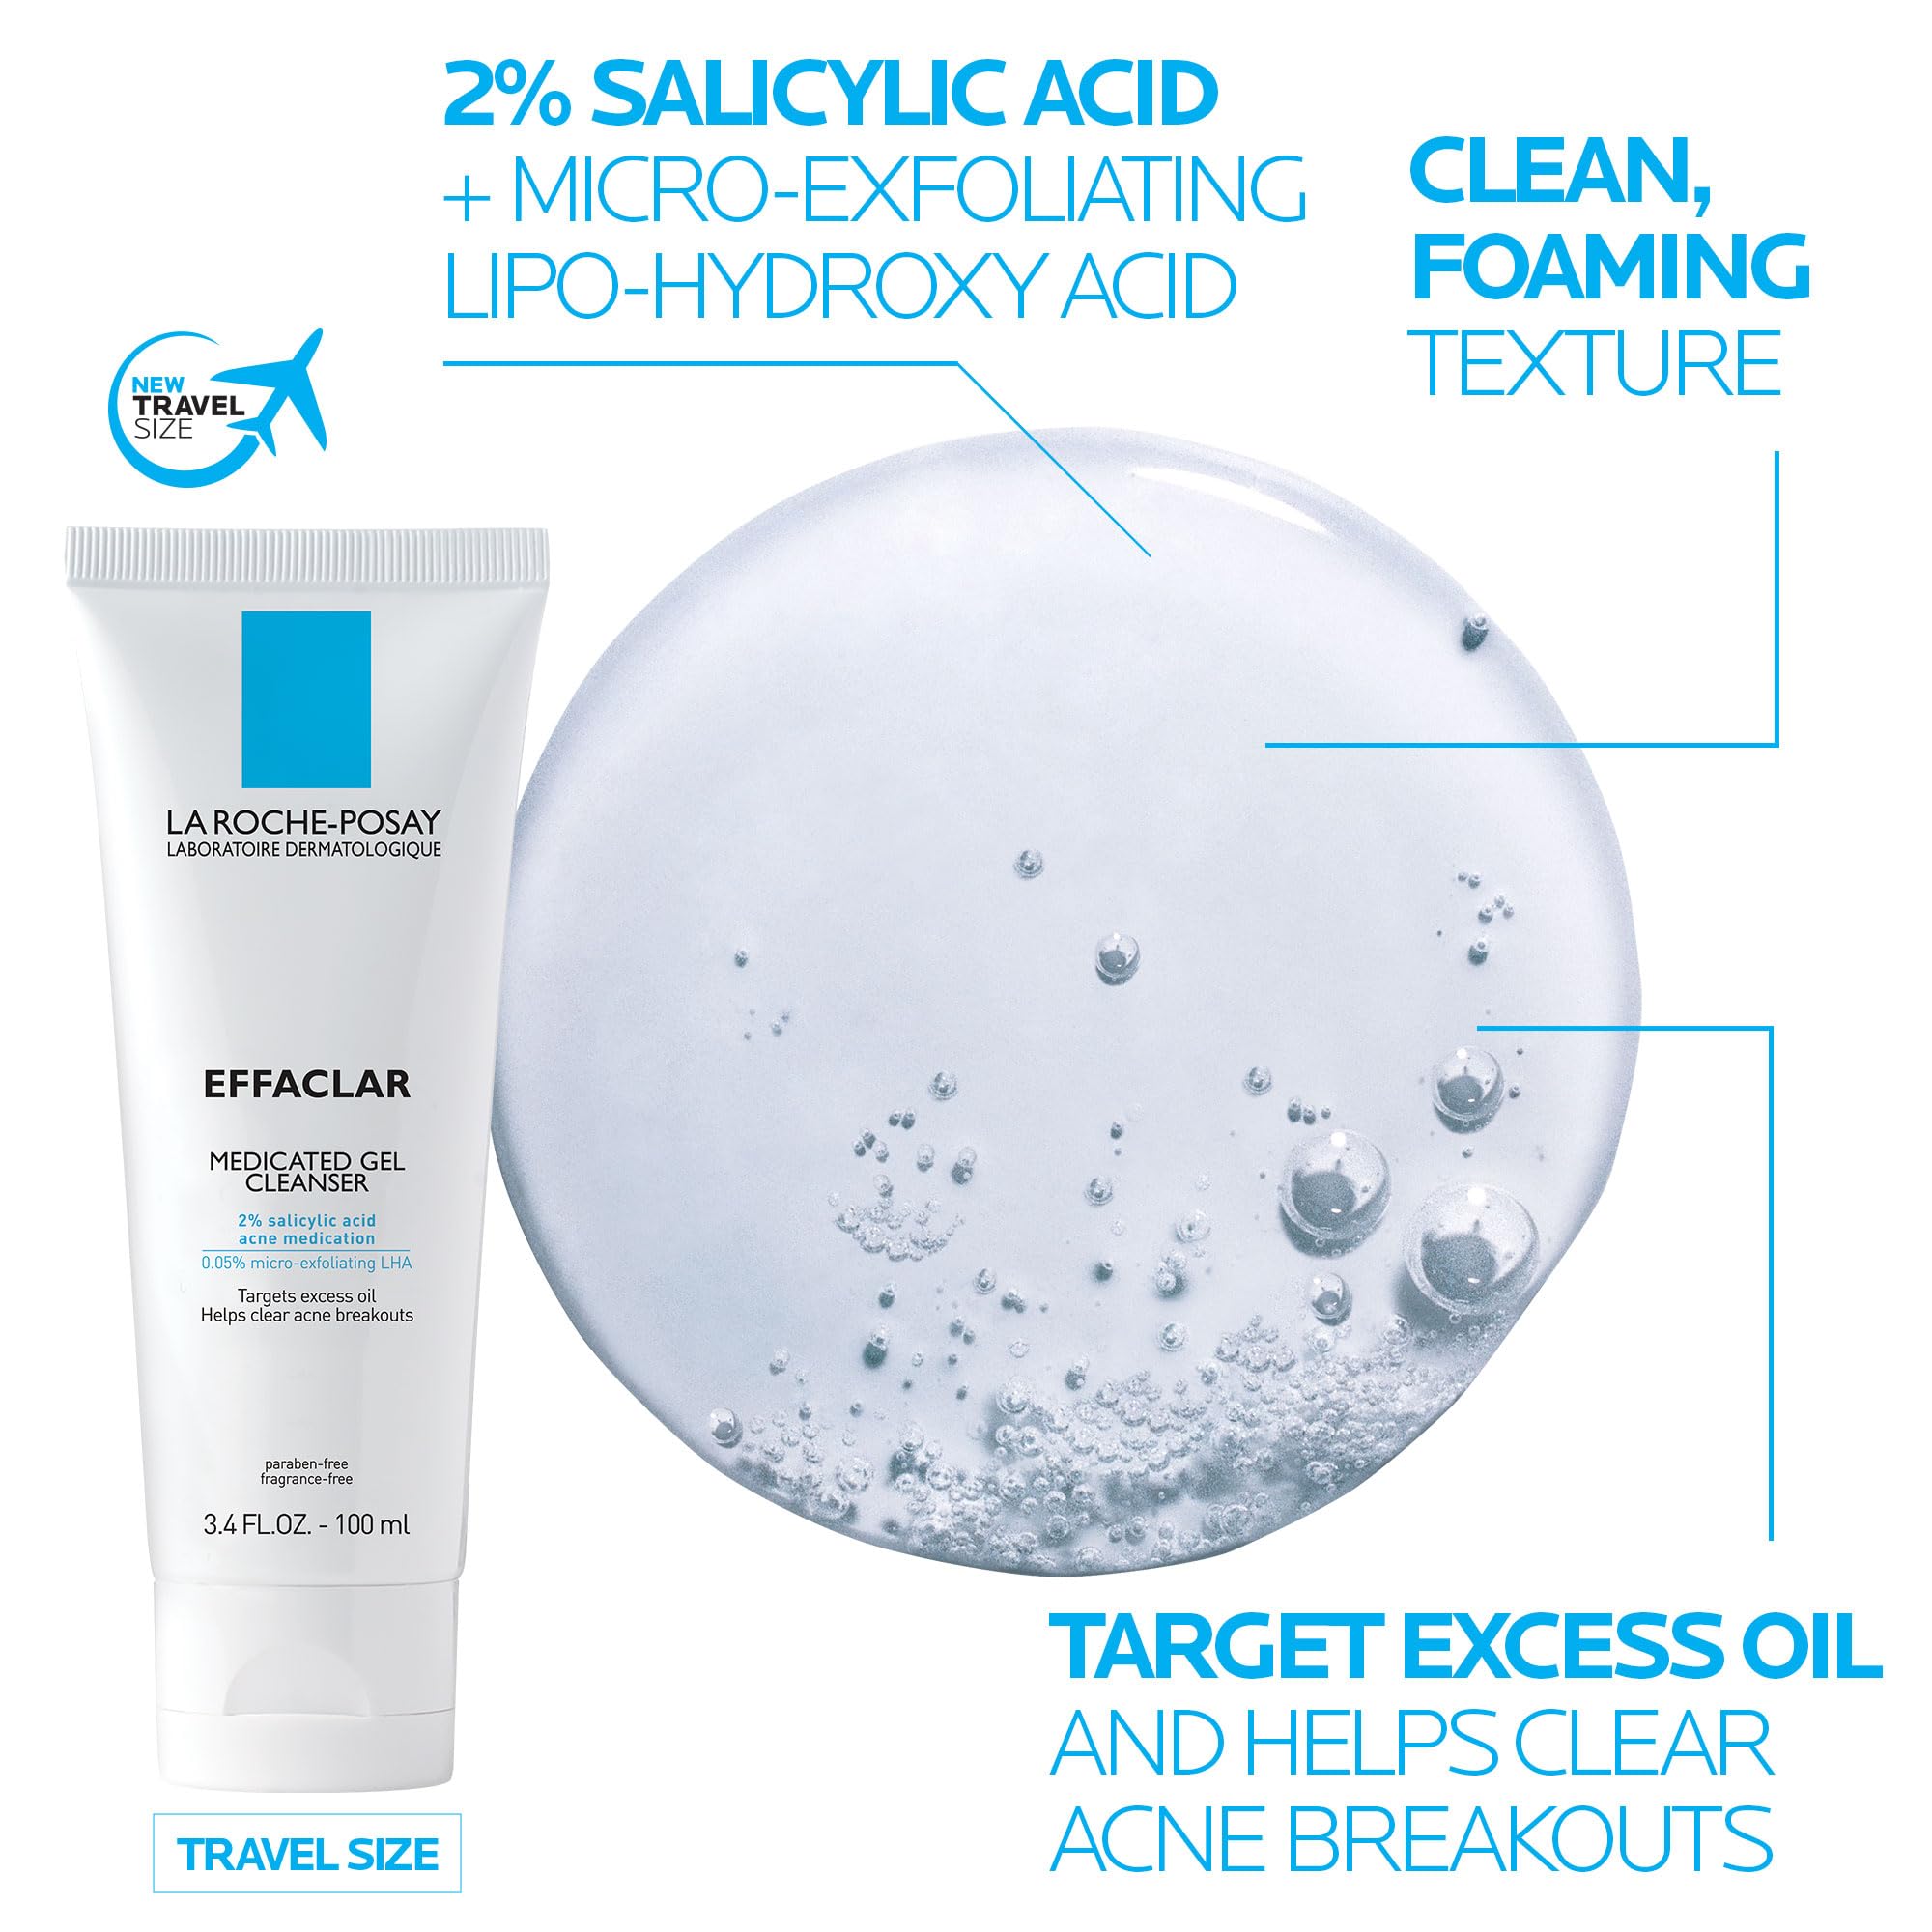 La Roche-Posay Effaclar Medicated Gel Facial Cleanser 100ML with Toleriane Double Repair Matte Face Moisturizer, Daily Gel Moisturizer and Cleanser for Oily Skin Control with Niacinamide, Oil Free